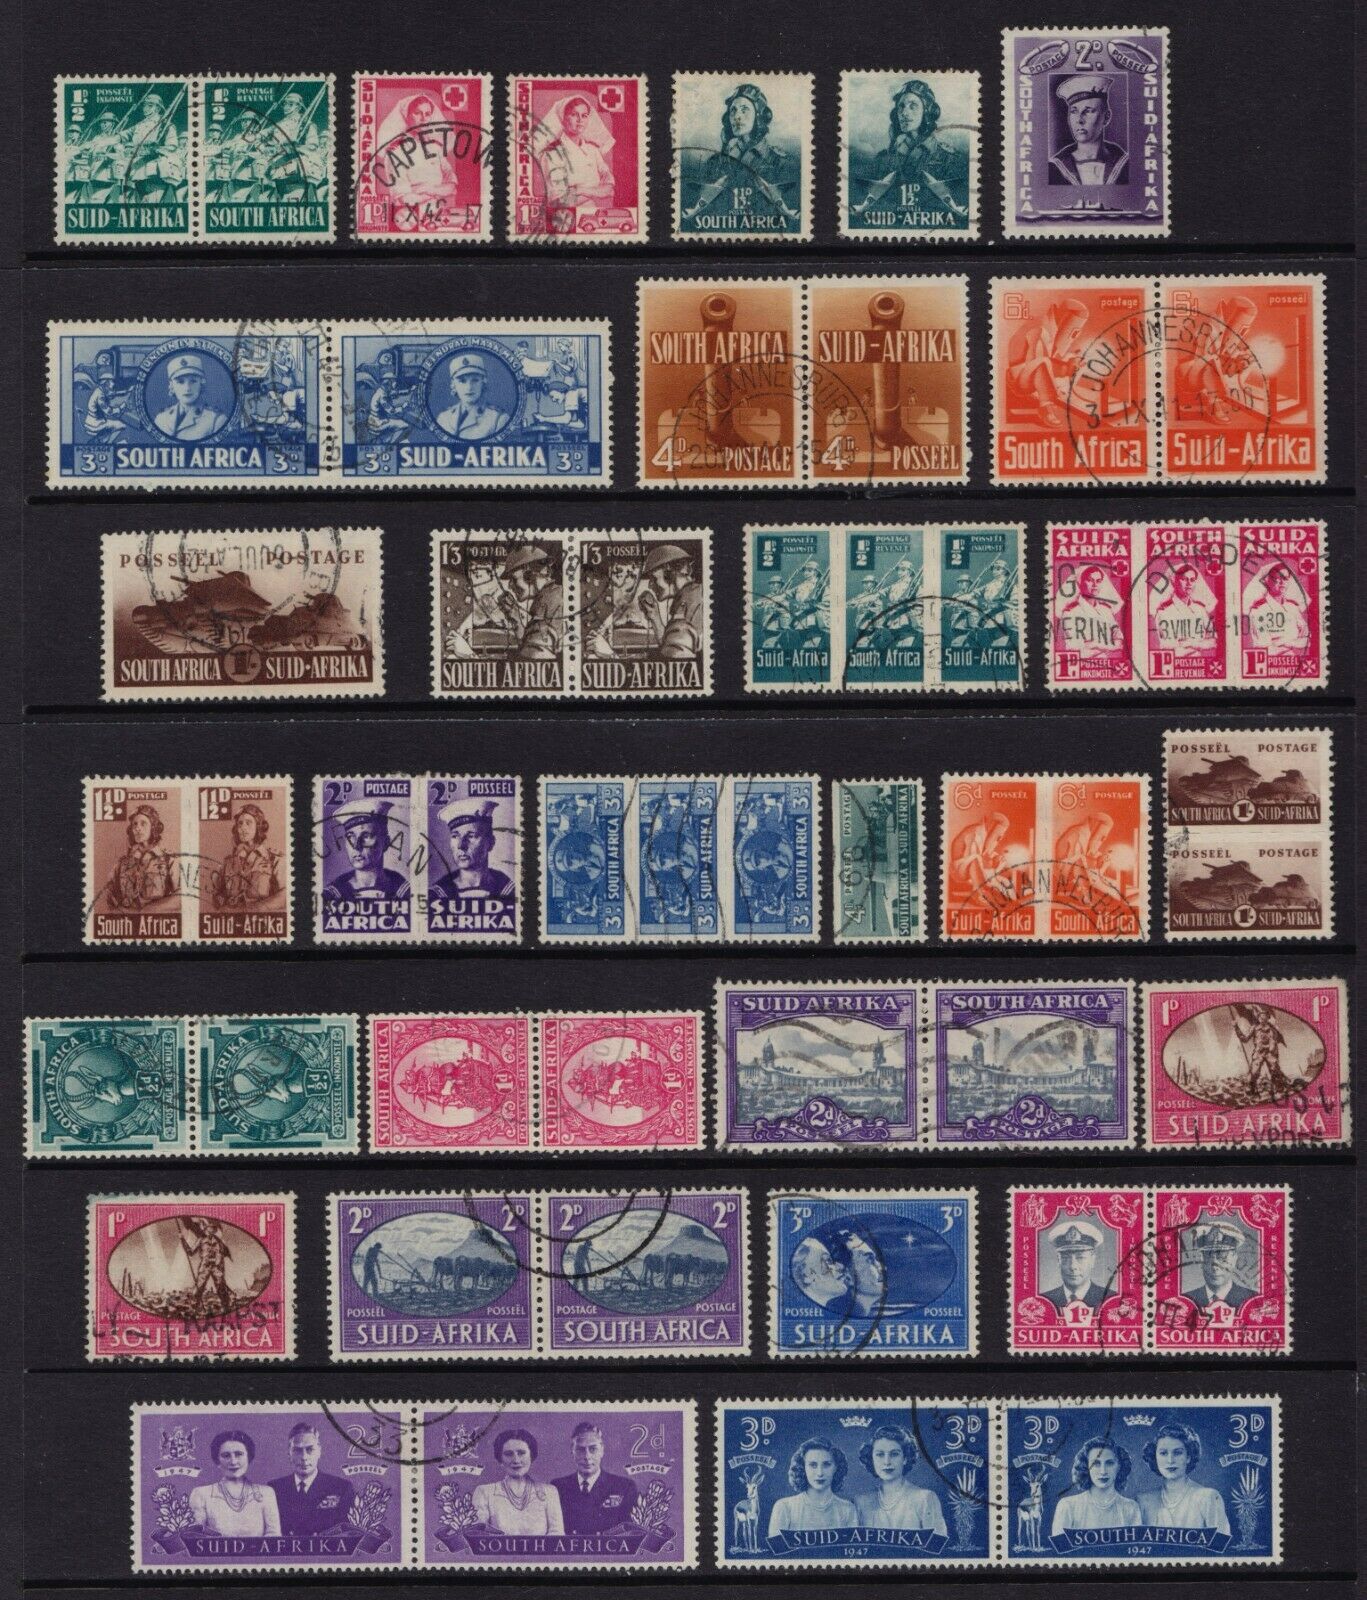 South Africa Fine Used 1941-1947 Issues, Some Good Pairs, Roulettes